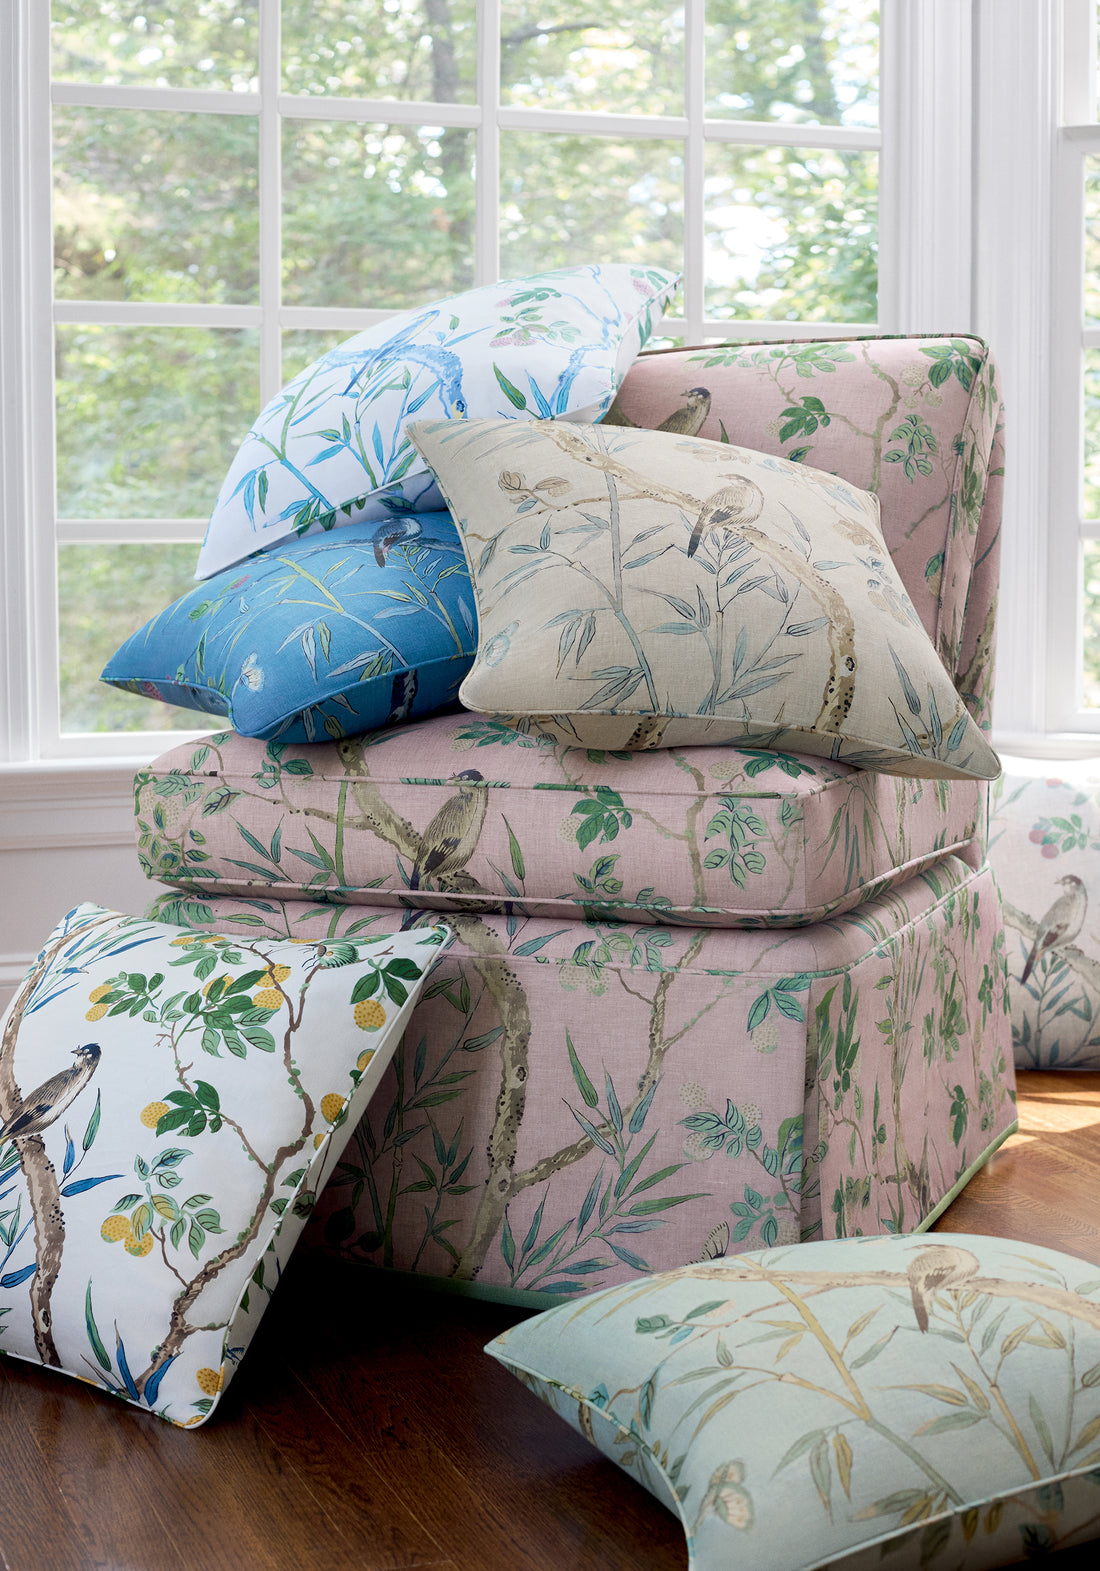 Pillow made with claire fabric in spa blue color - pattern number F942010 - by Thibaut in the Sojourn collection